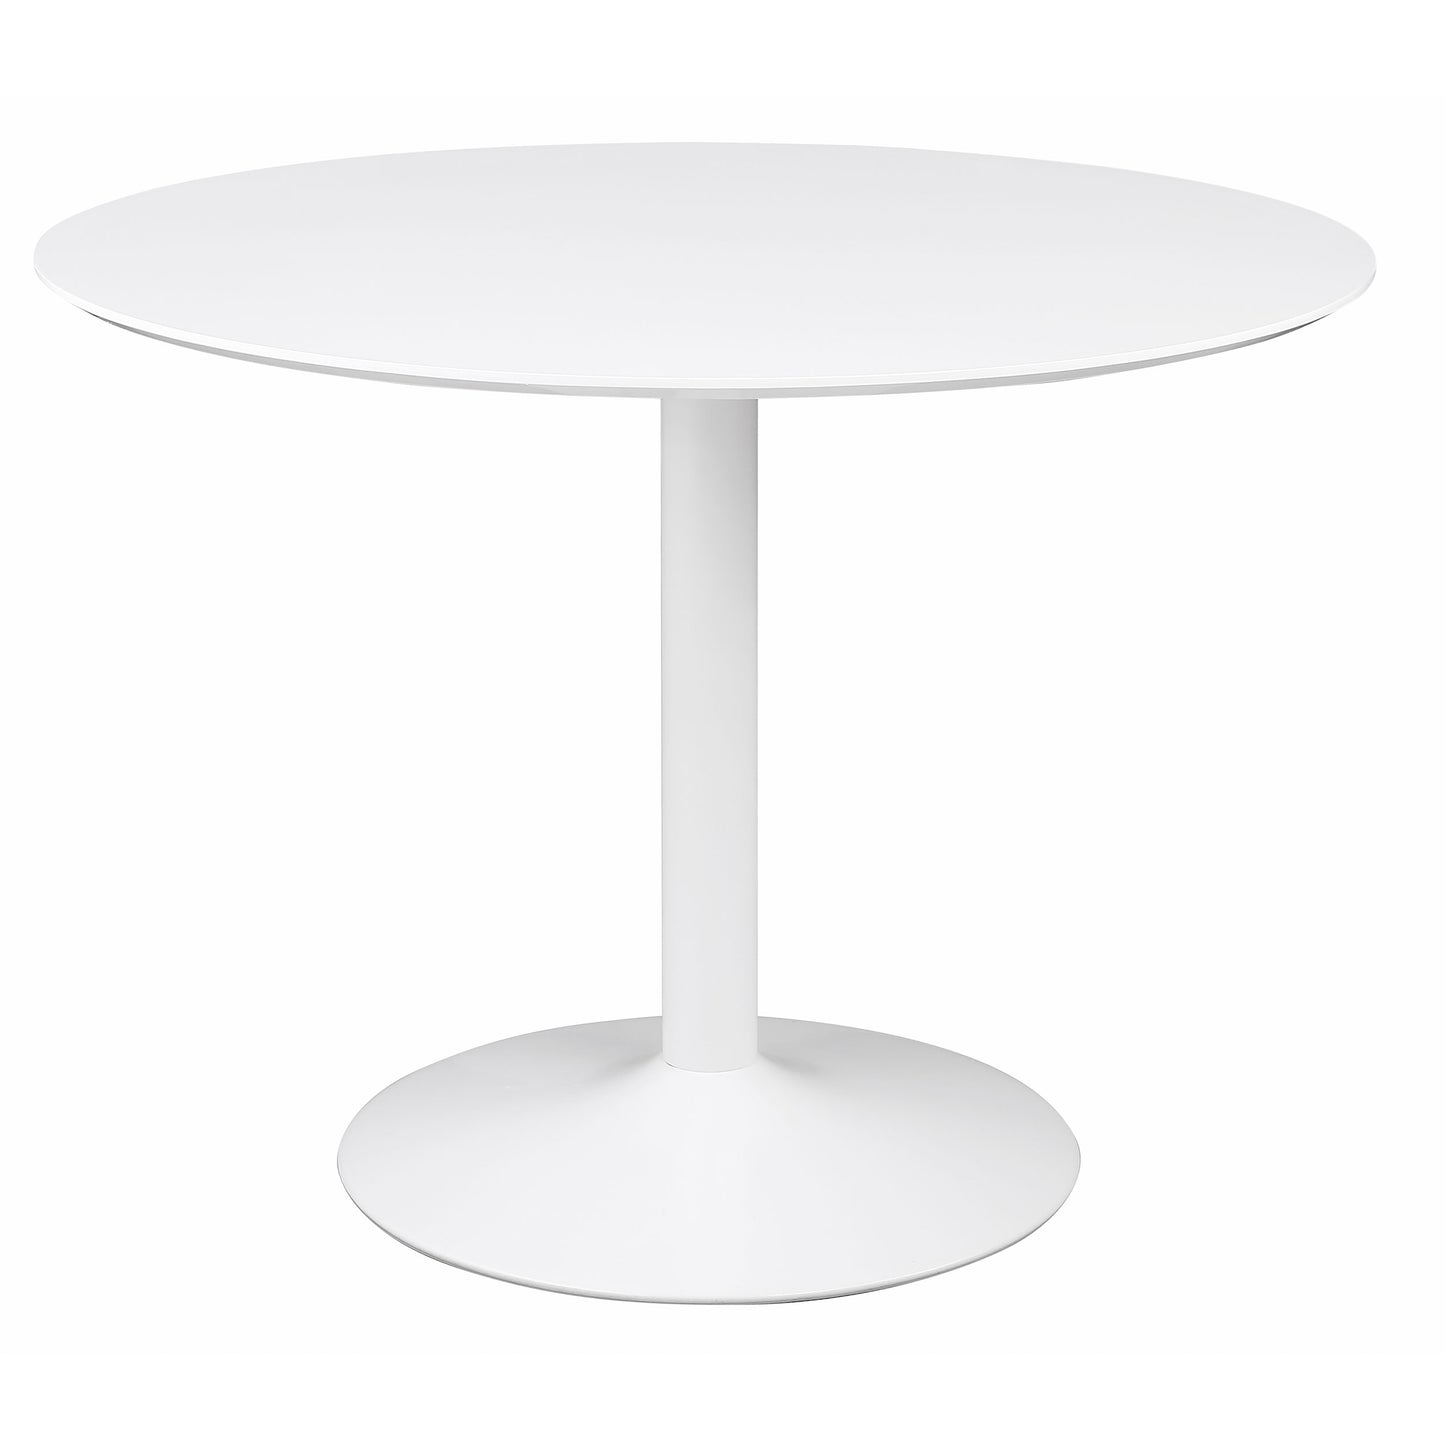 Lowry 5-piece Round Dining Set Tulip Table with Eiffel Chairs White